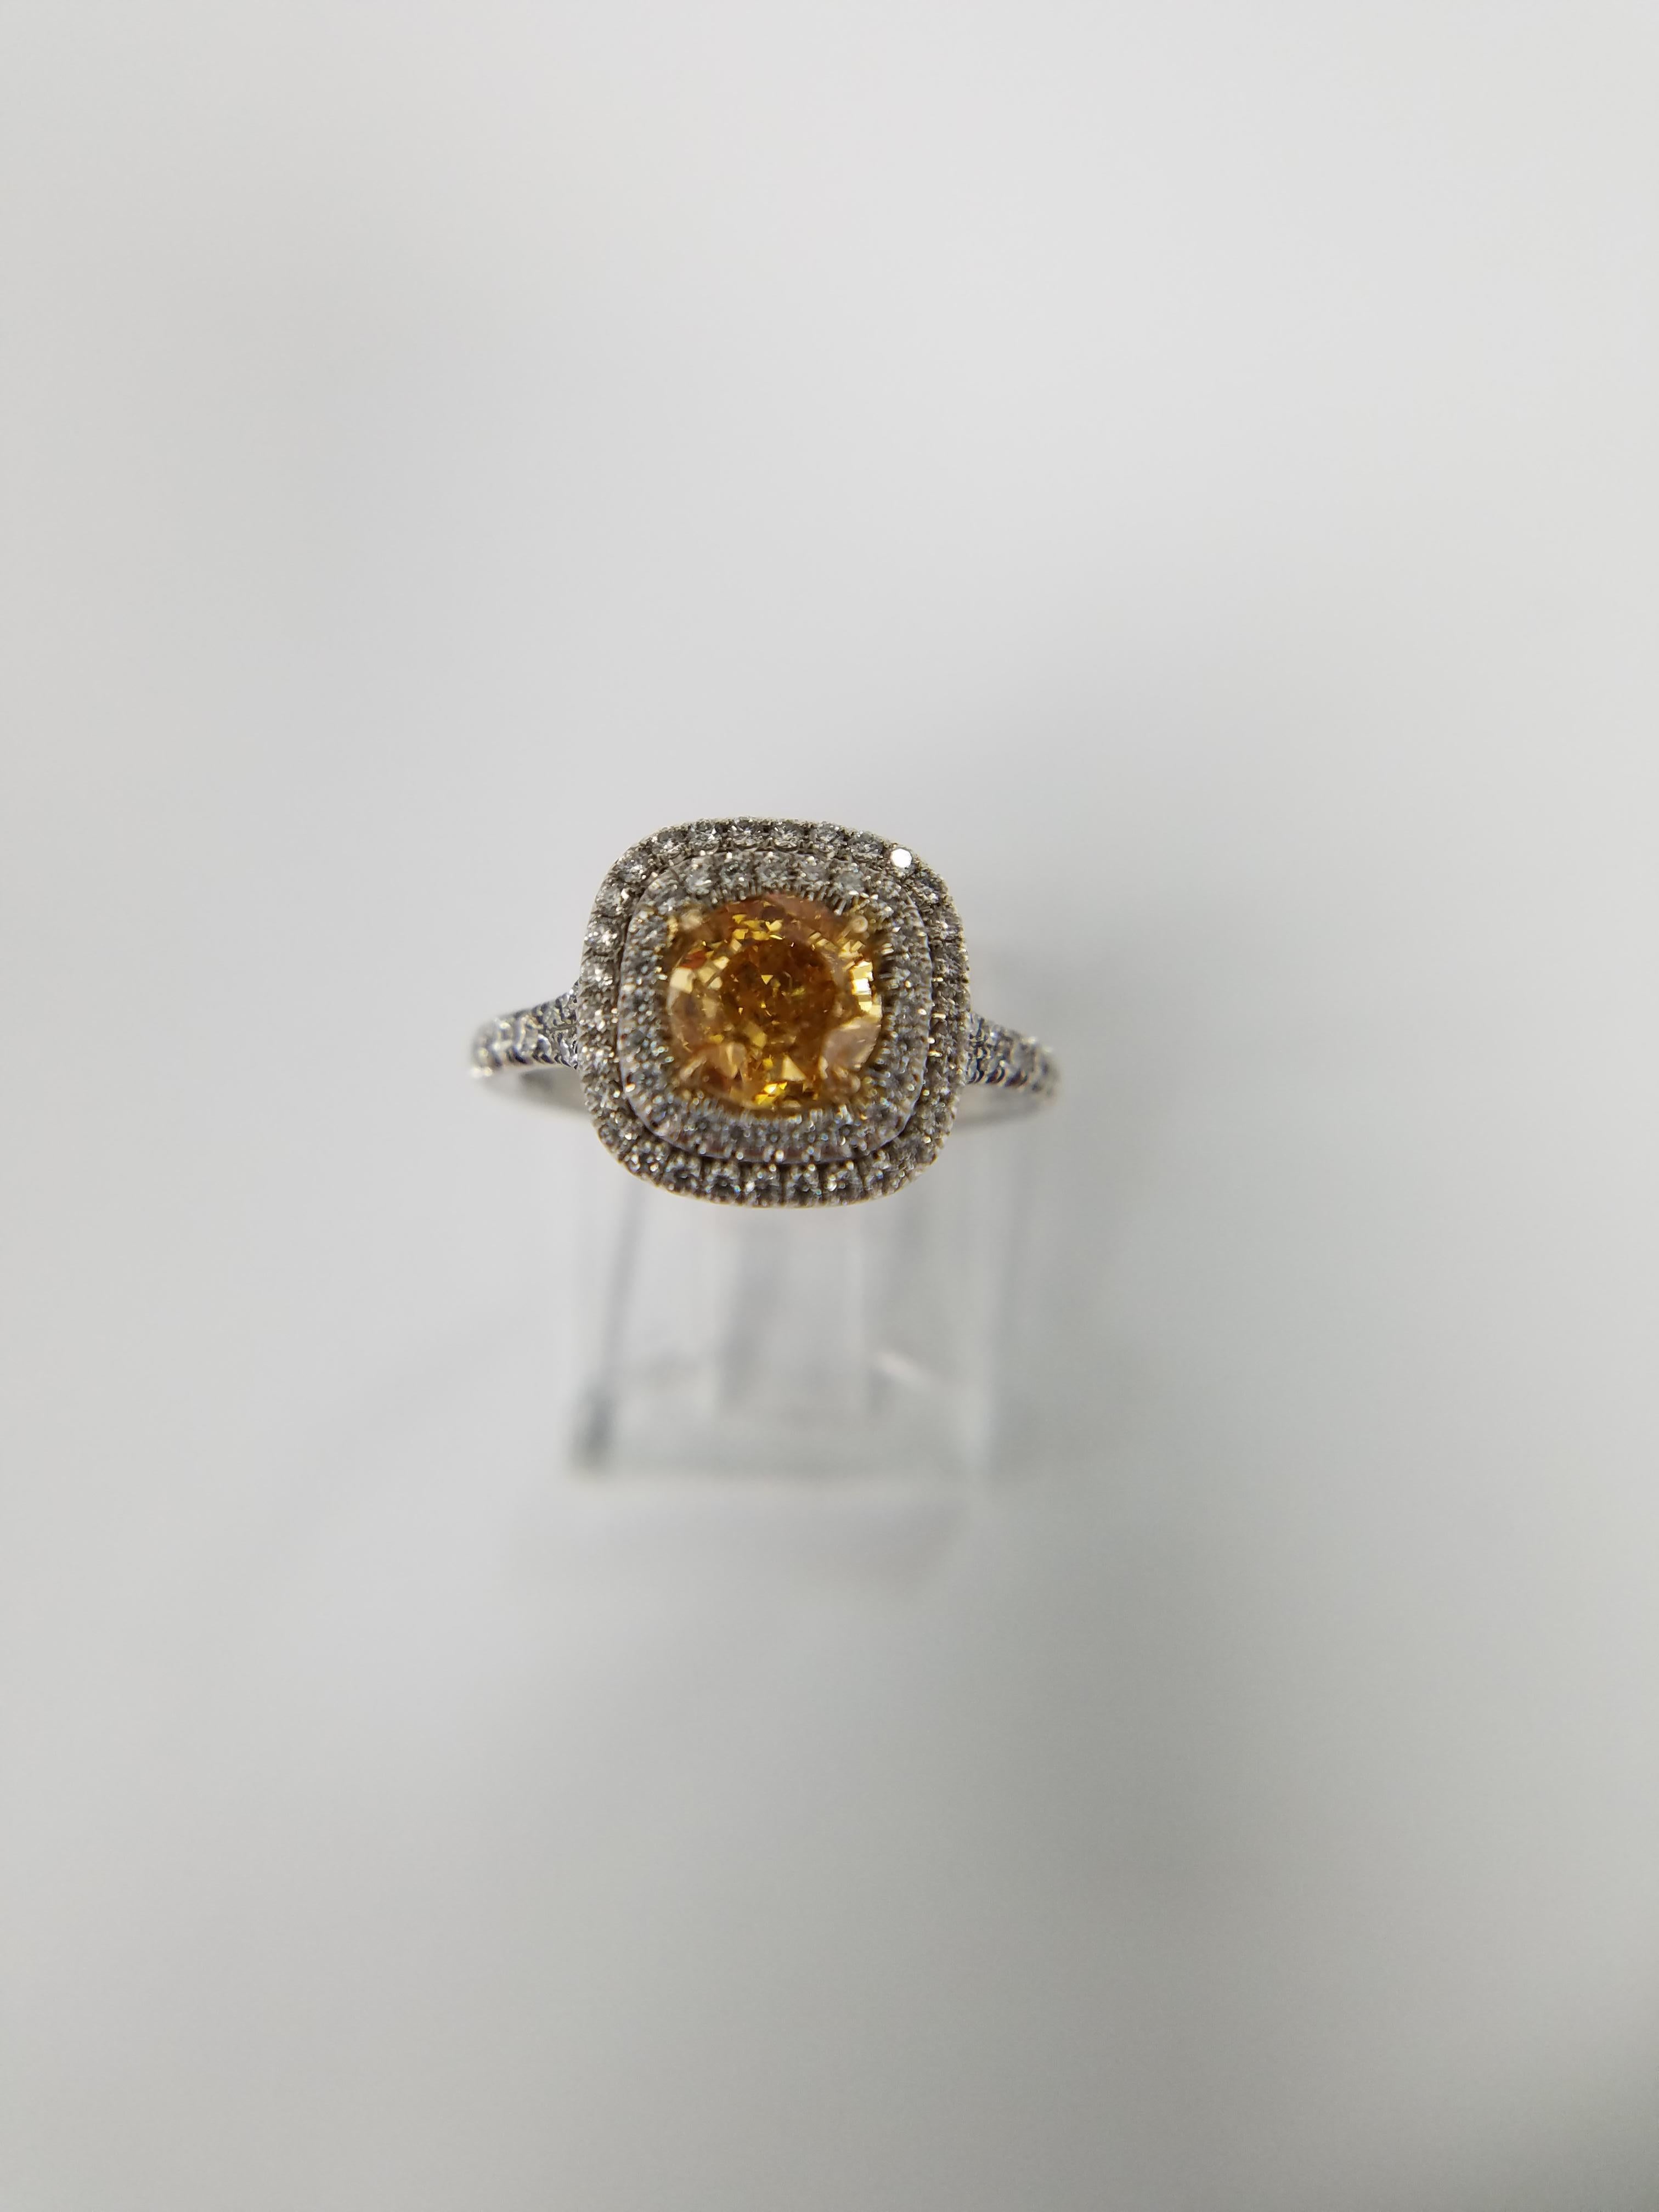 GIA Certified 1.02 carat Diamond Natural Fancy Intense Yellow Orange Color set in a platinum and 18 K yellow gold with 83 white diamonds weighing 0.53 carats. This is a very rare natural color diamond that is Orange colored.  
GIA report # 15127113